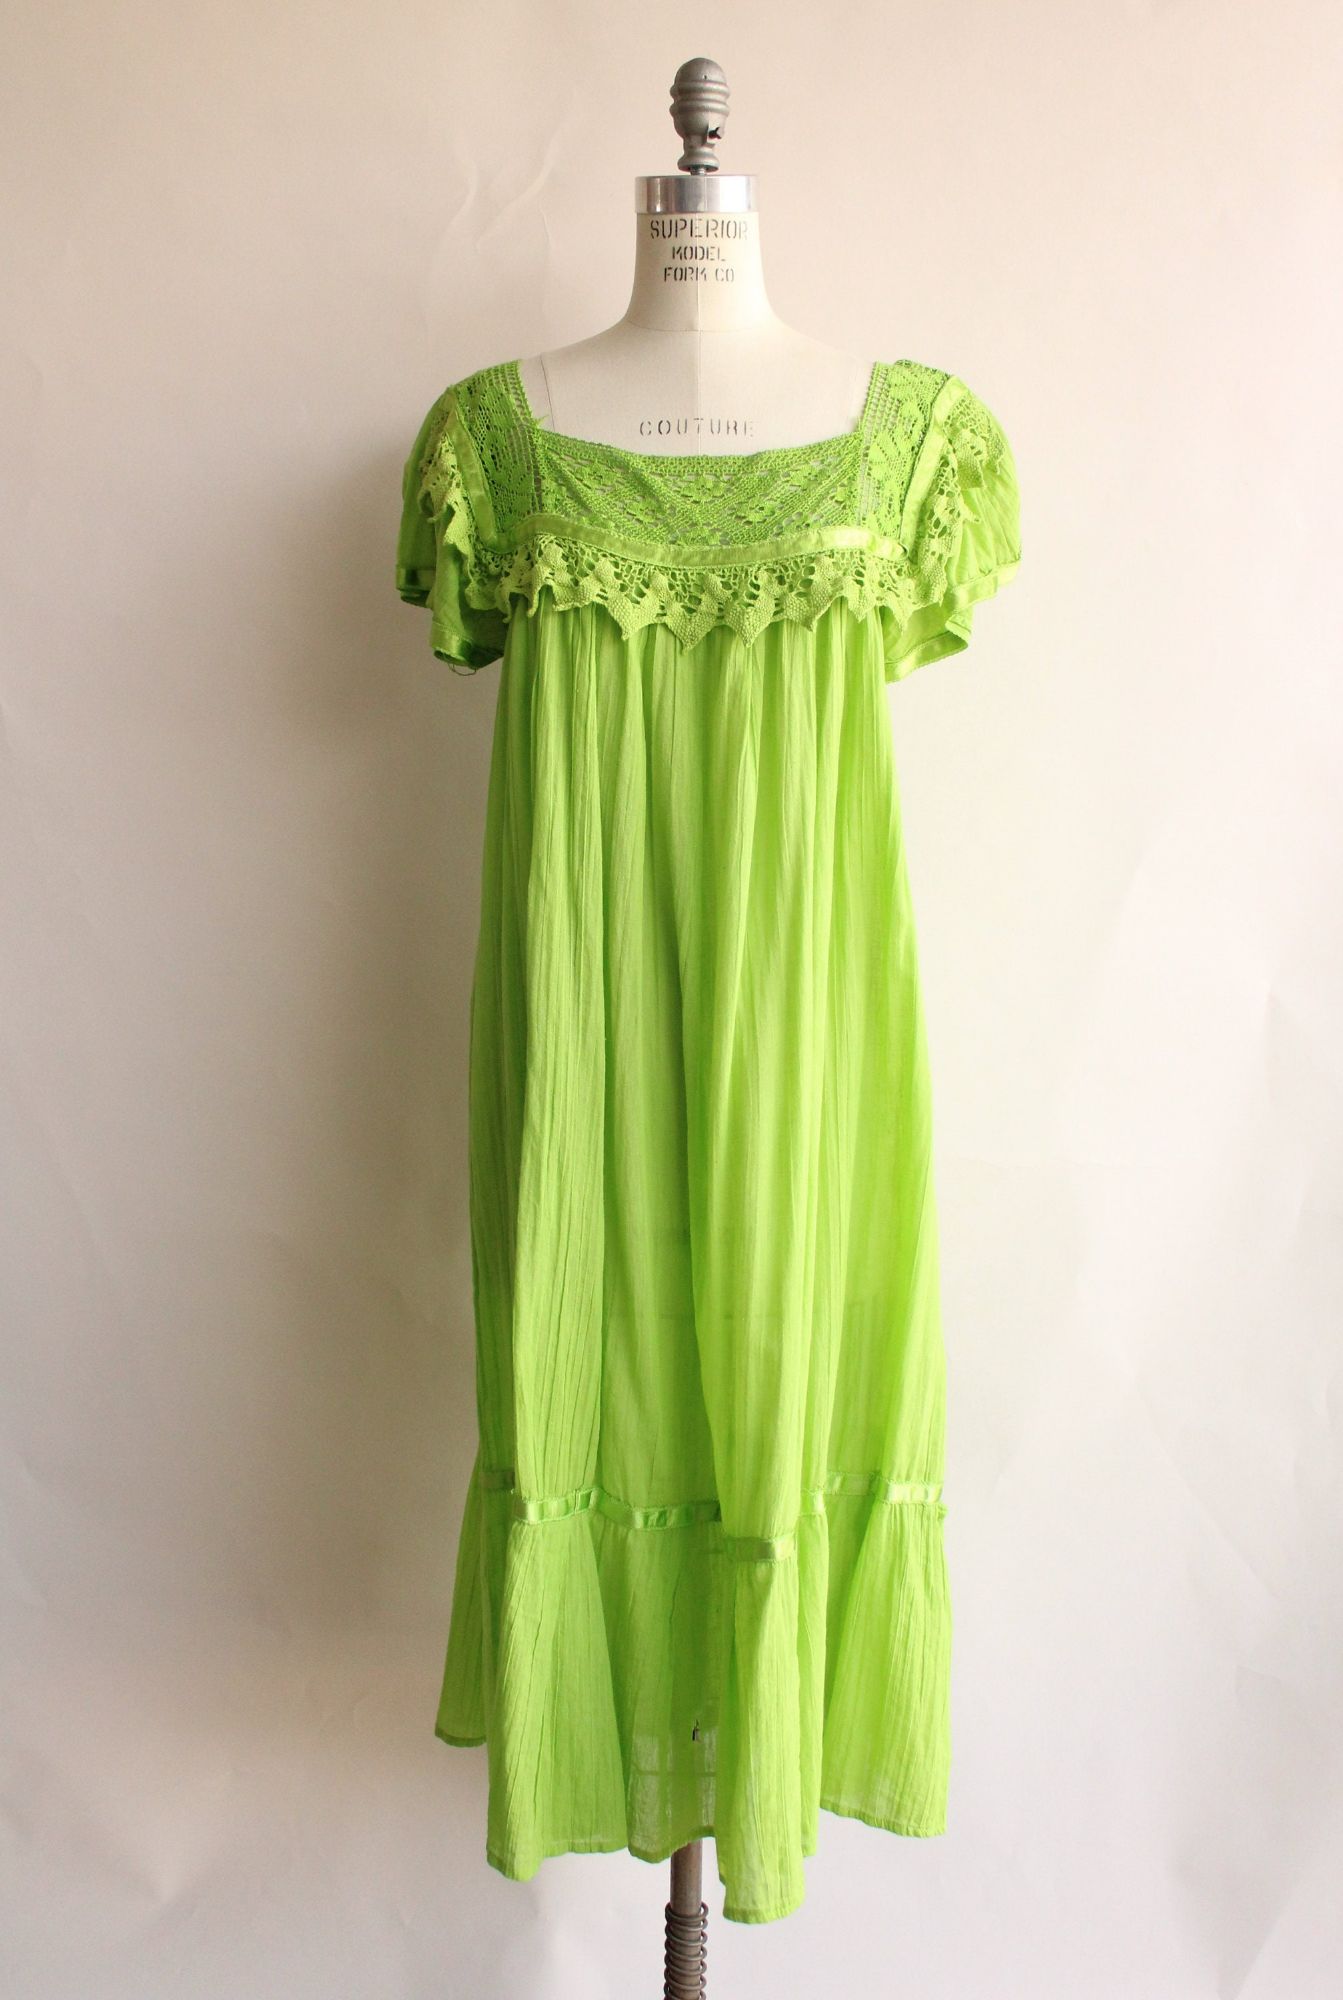 Vintage 1970s 1980s Apple Green Peasant Dress with Crochet Lace Trim